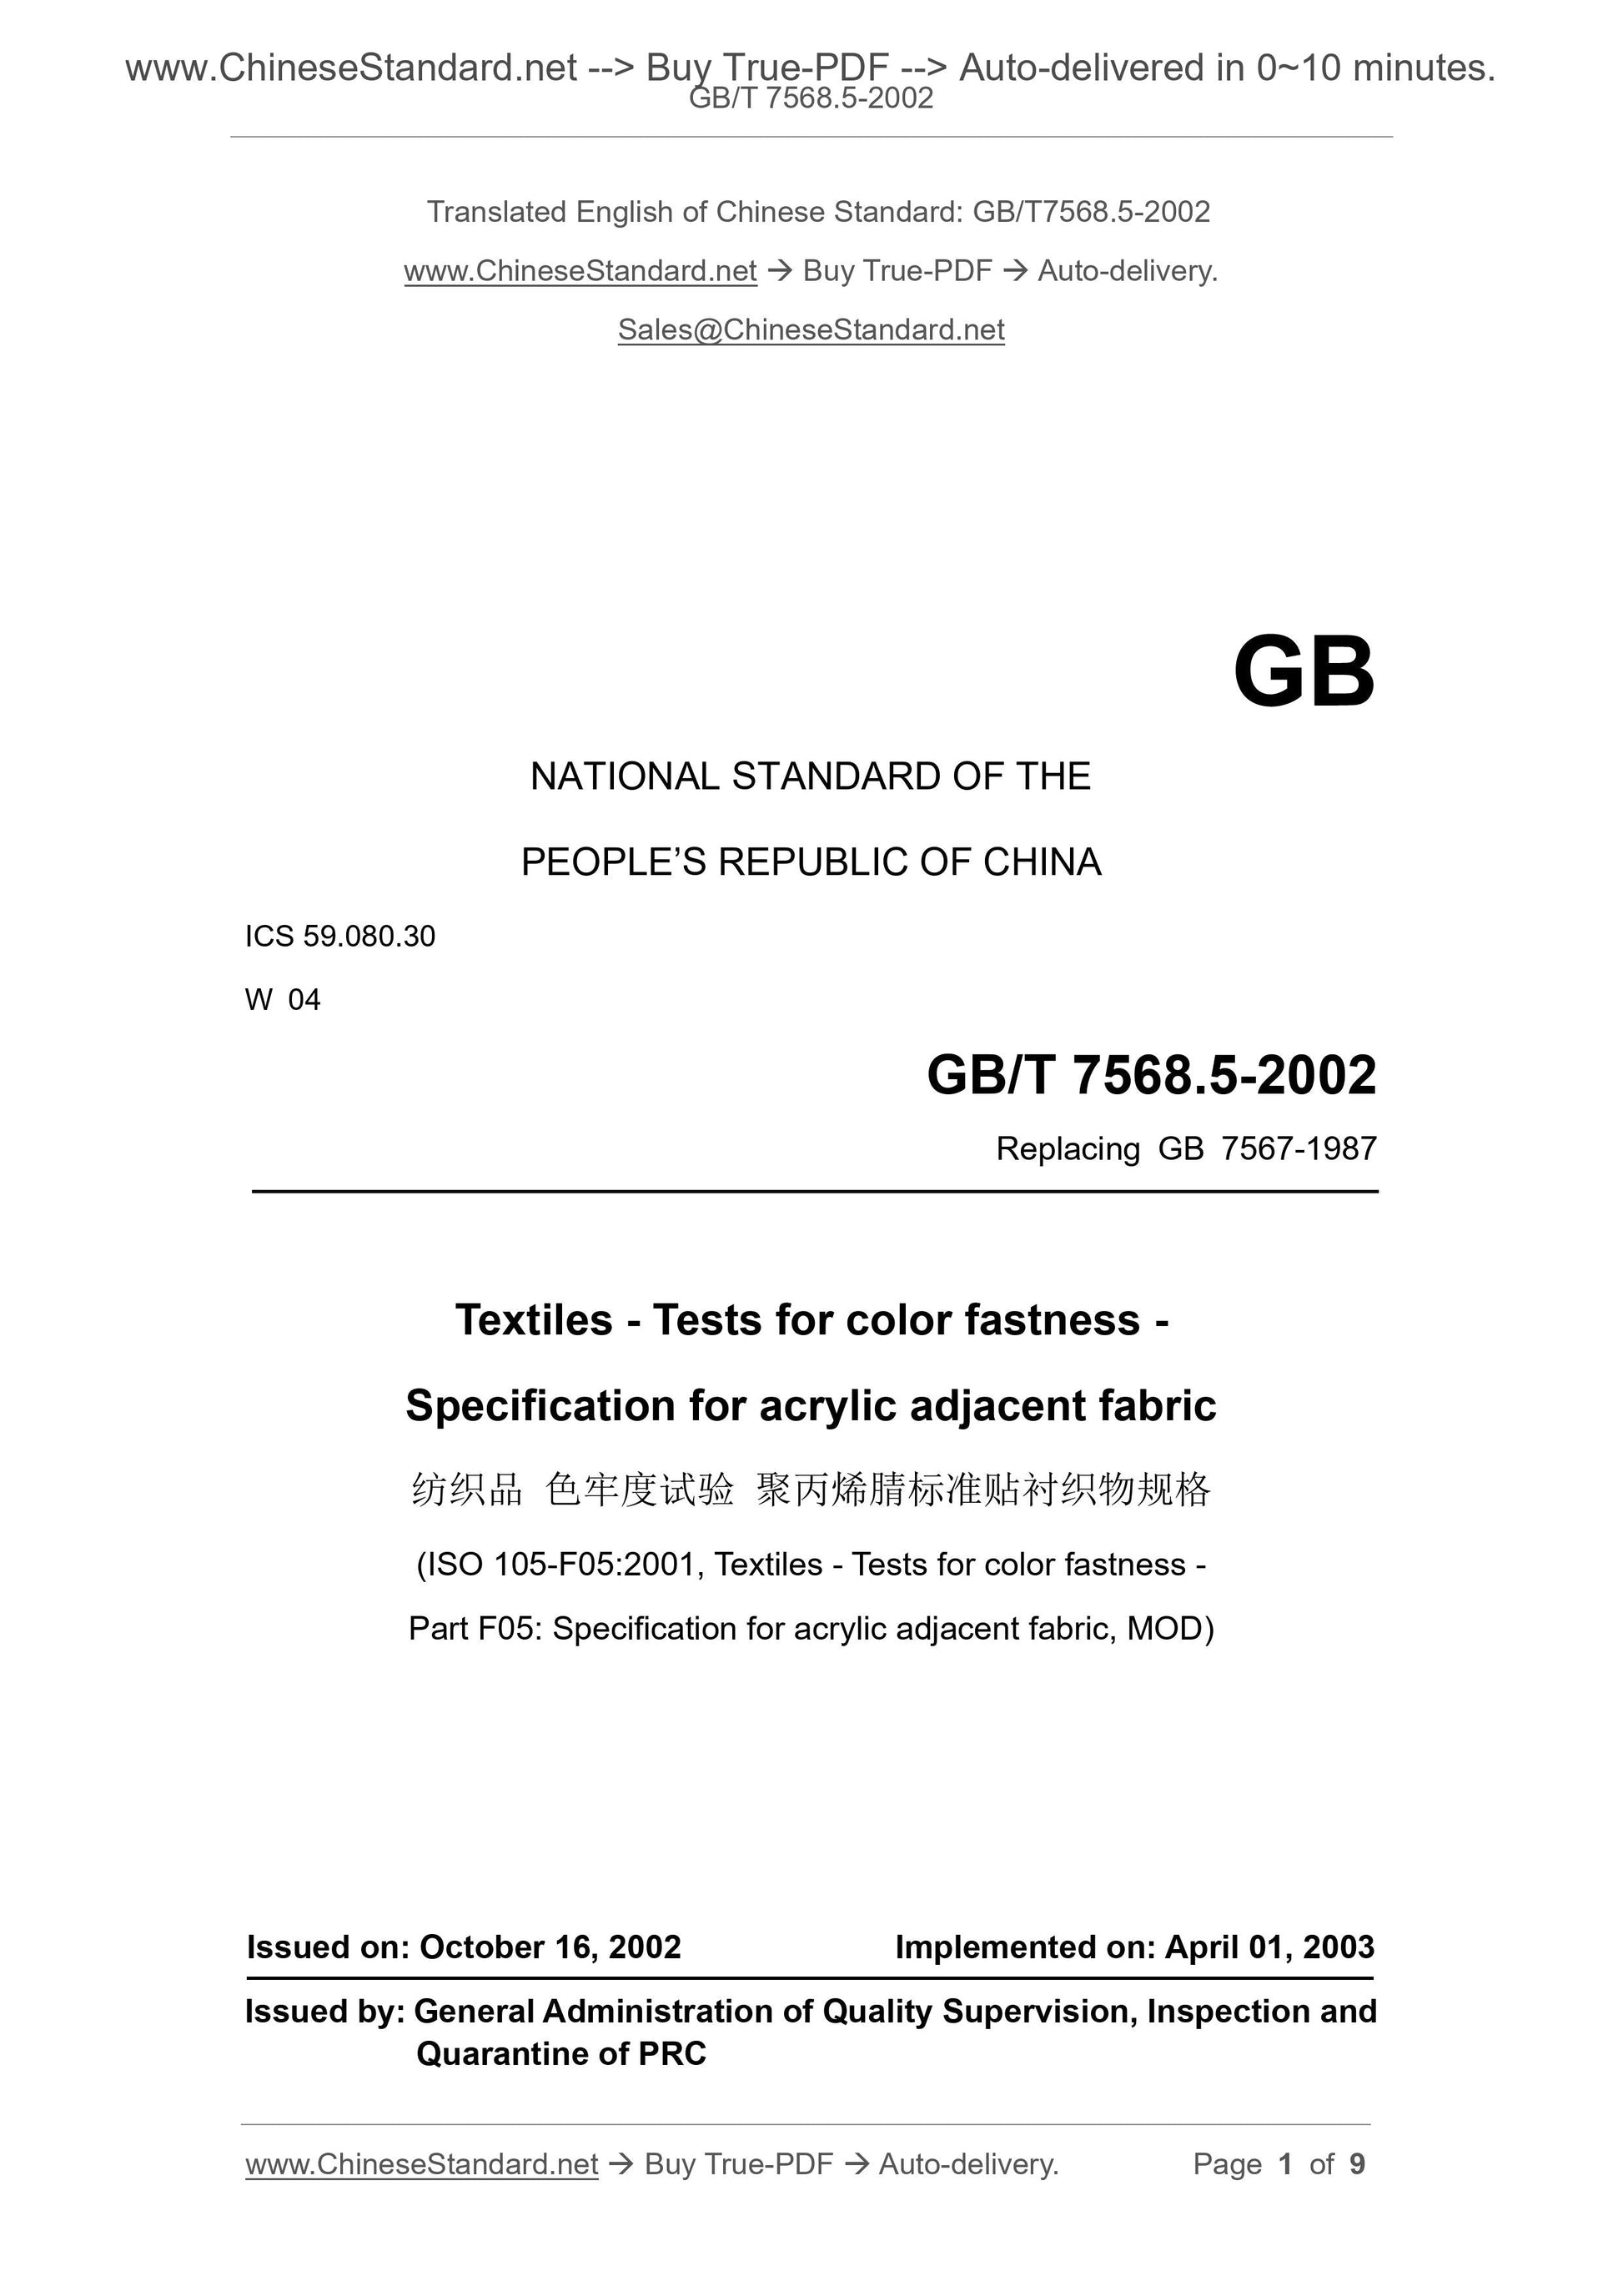 GB/T 7568.5-2002 Page 1